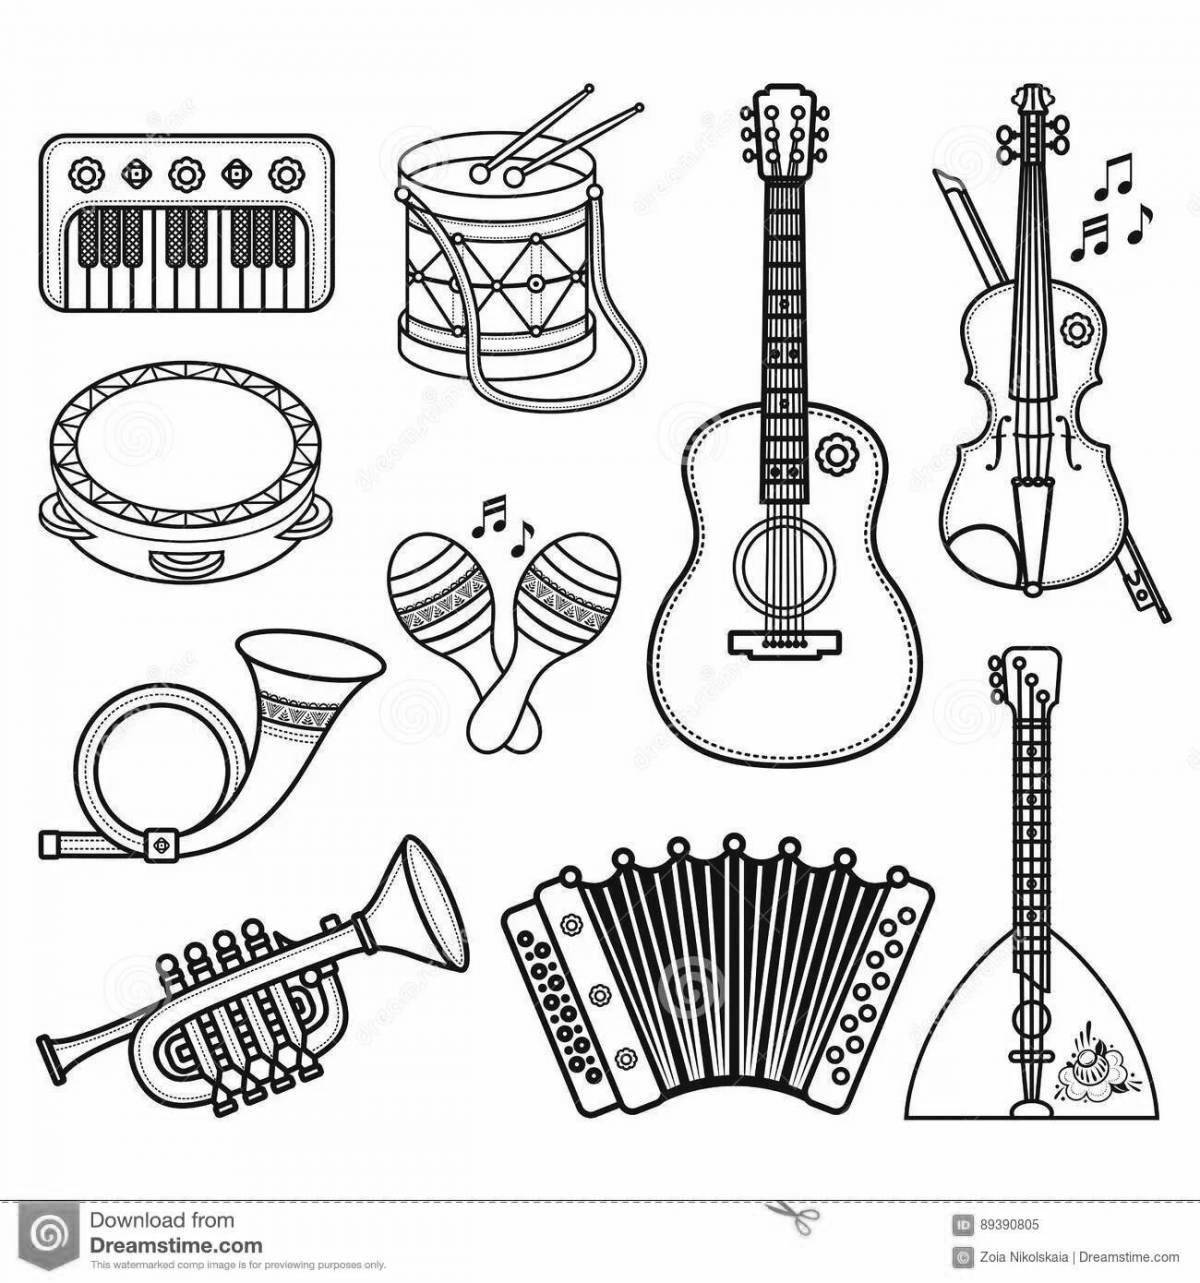 Exquisite musical instruments for button accordion for babies with names